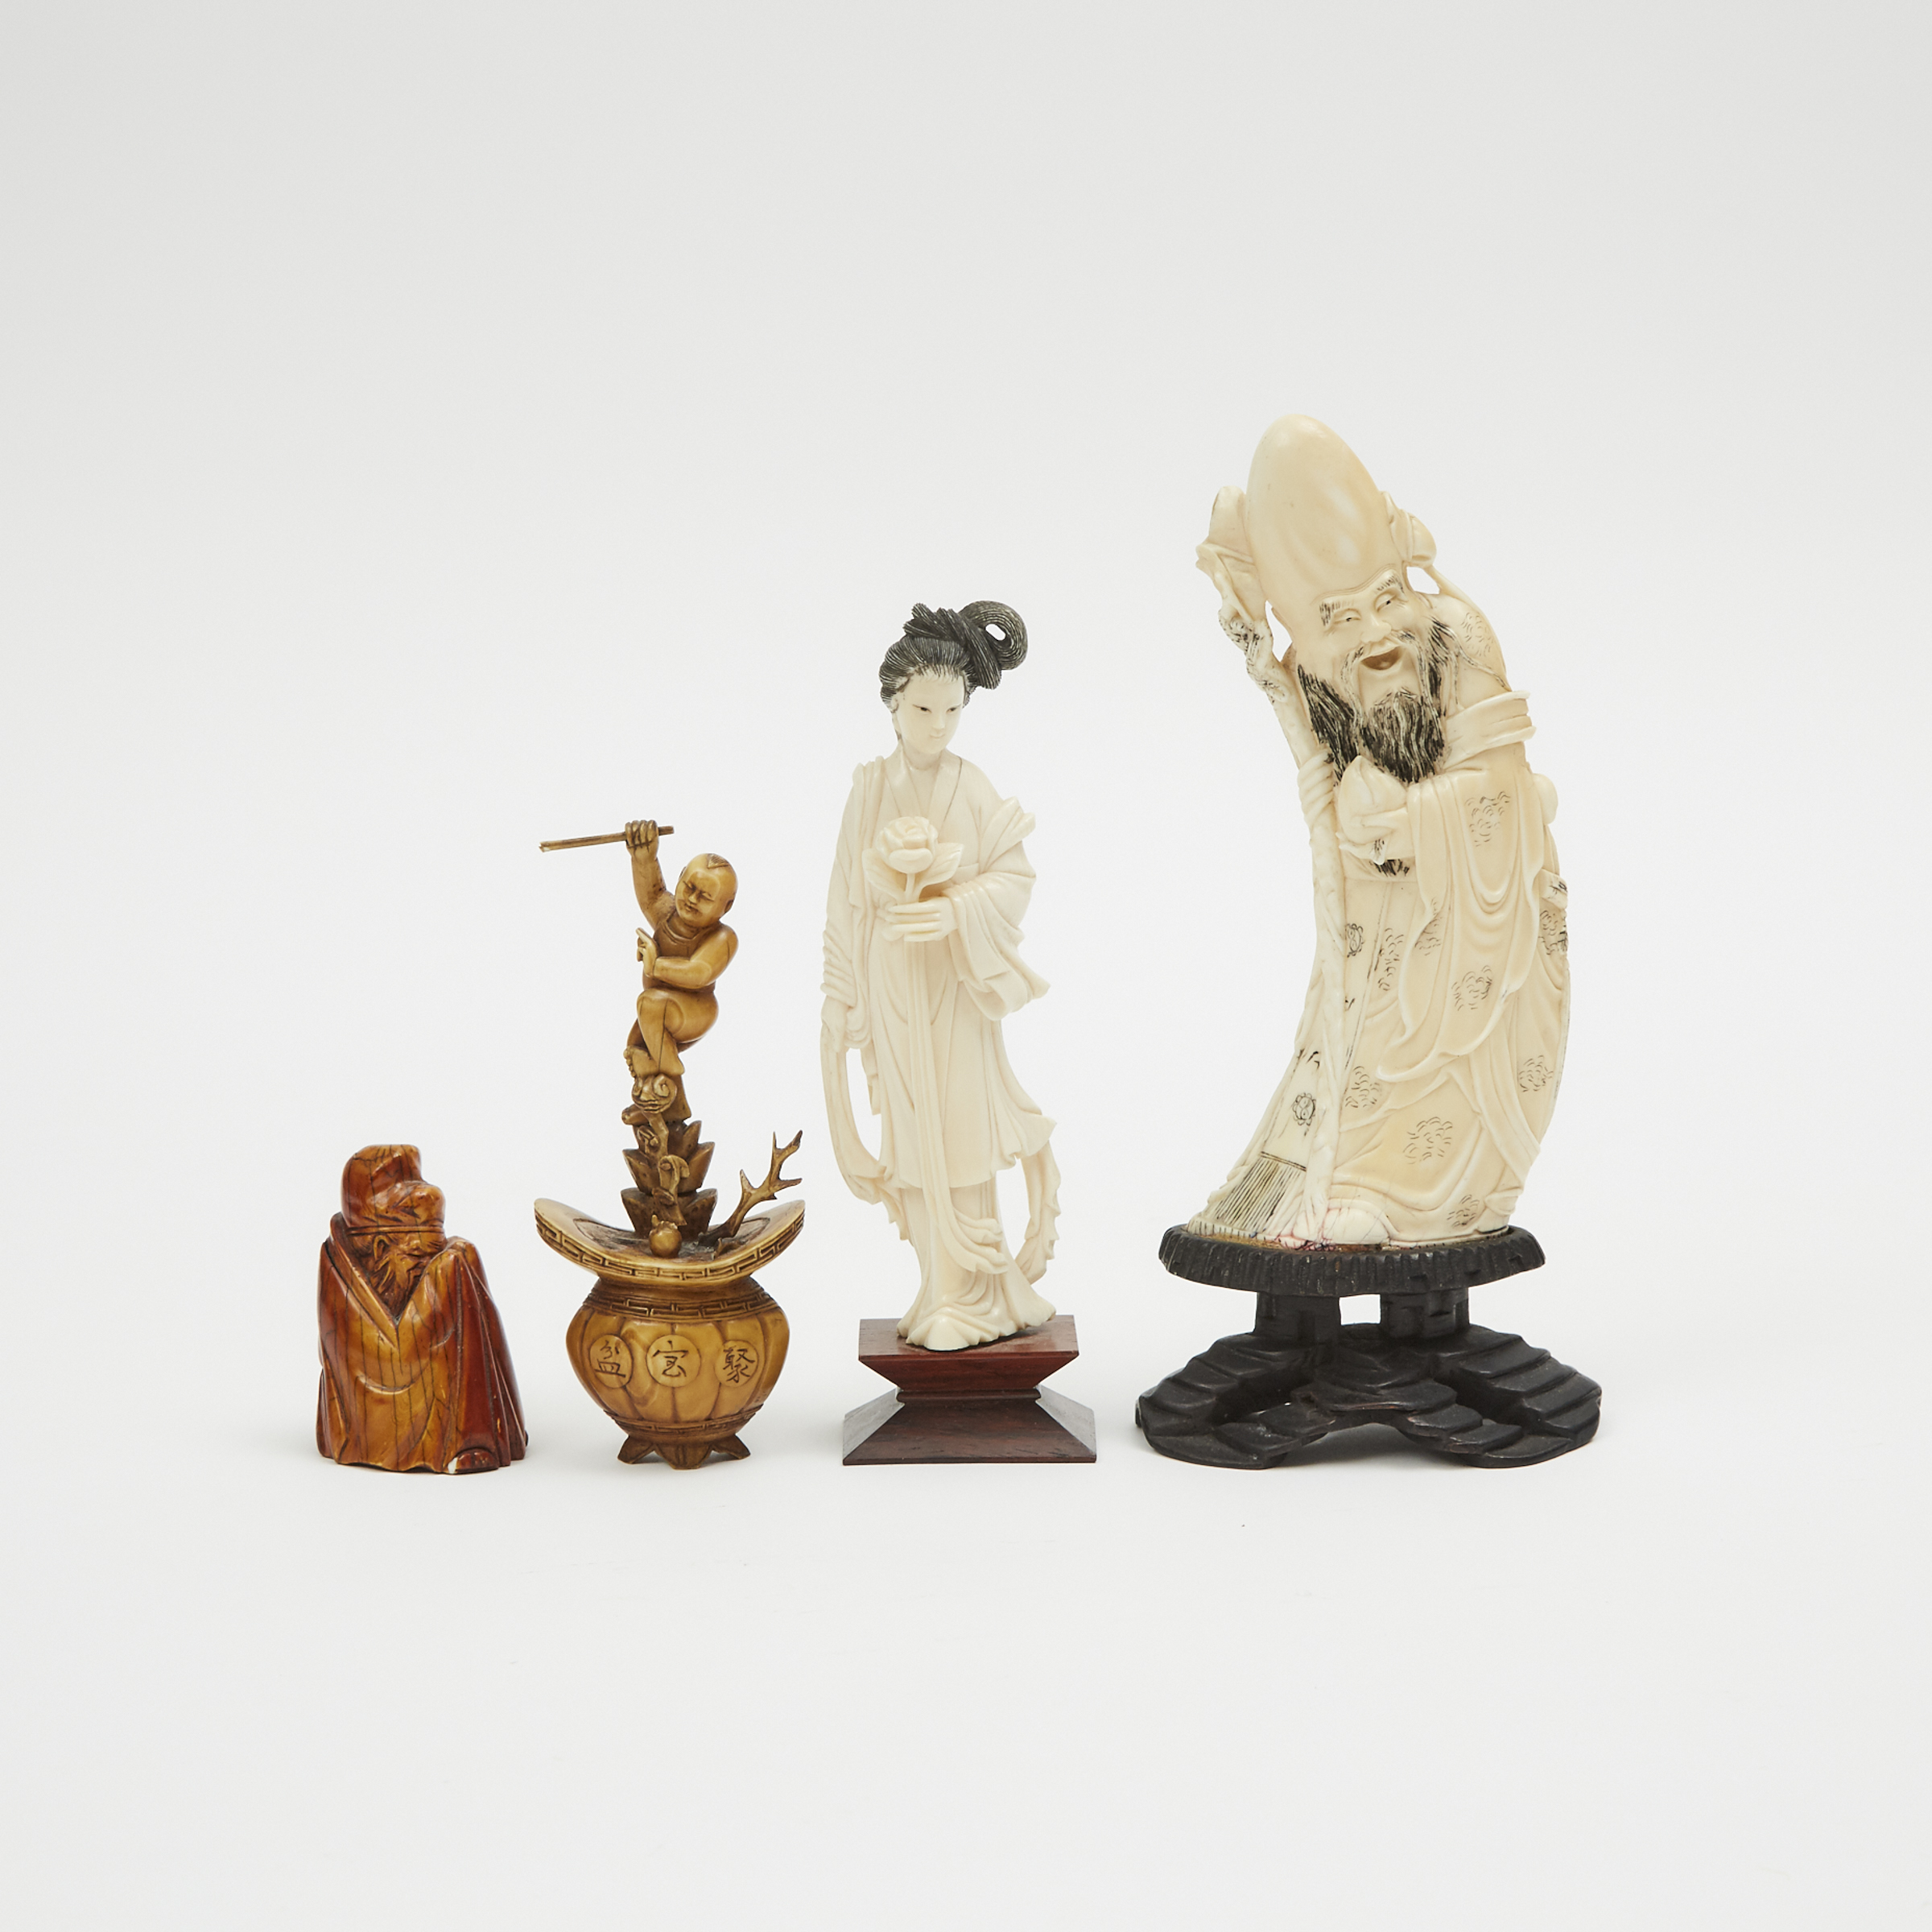 A Group of Four Chinese Ivory Carved Figures, 19th/Early 20th Century